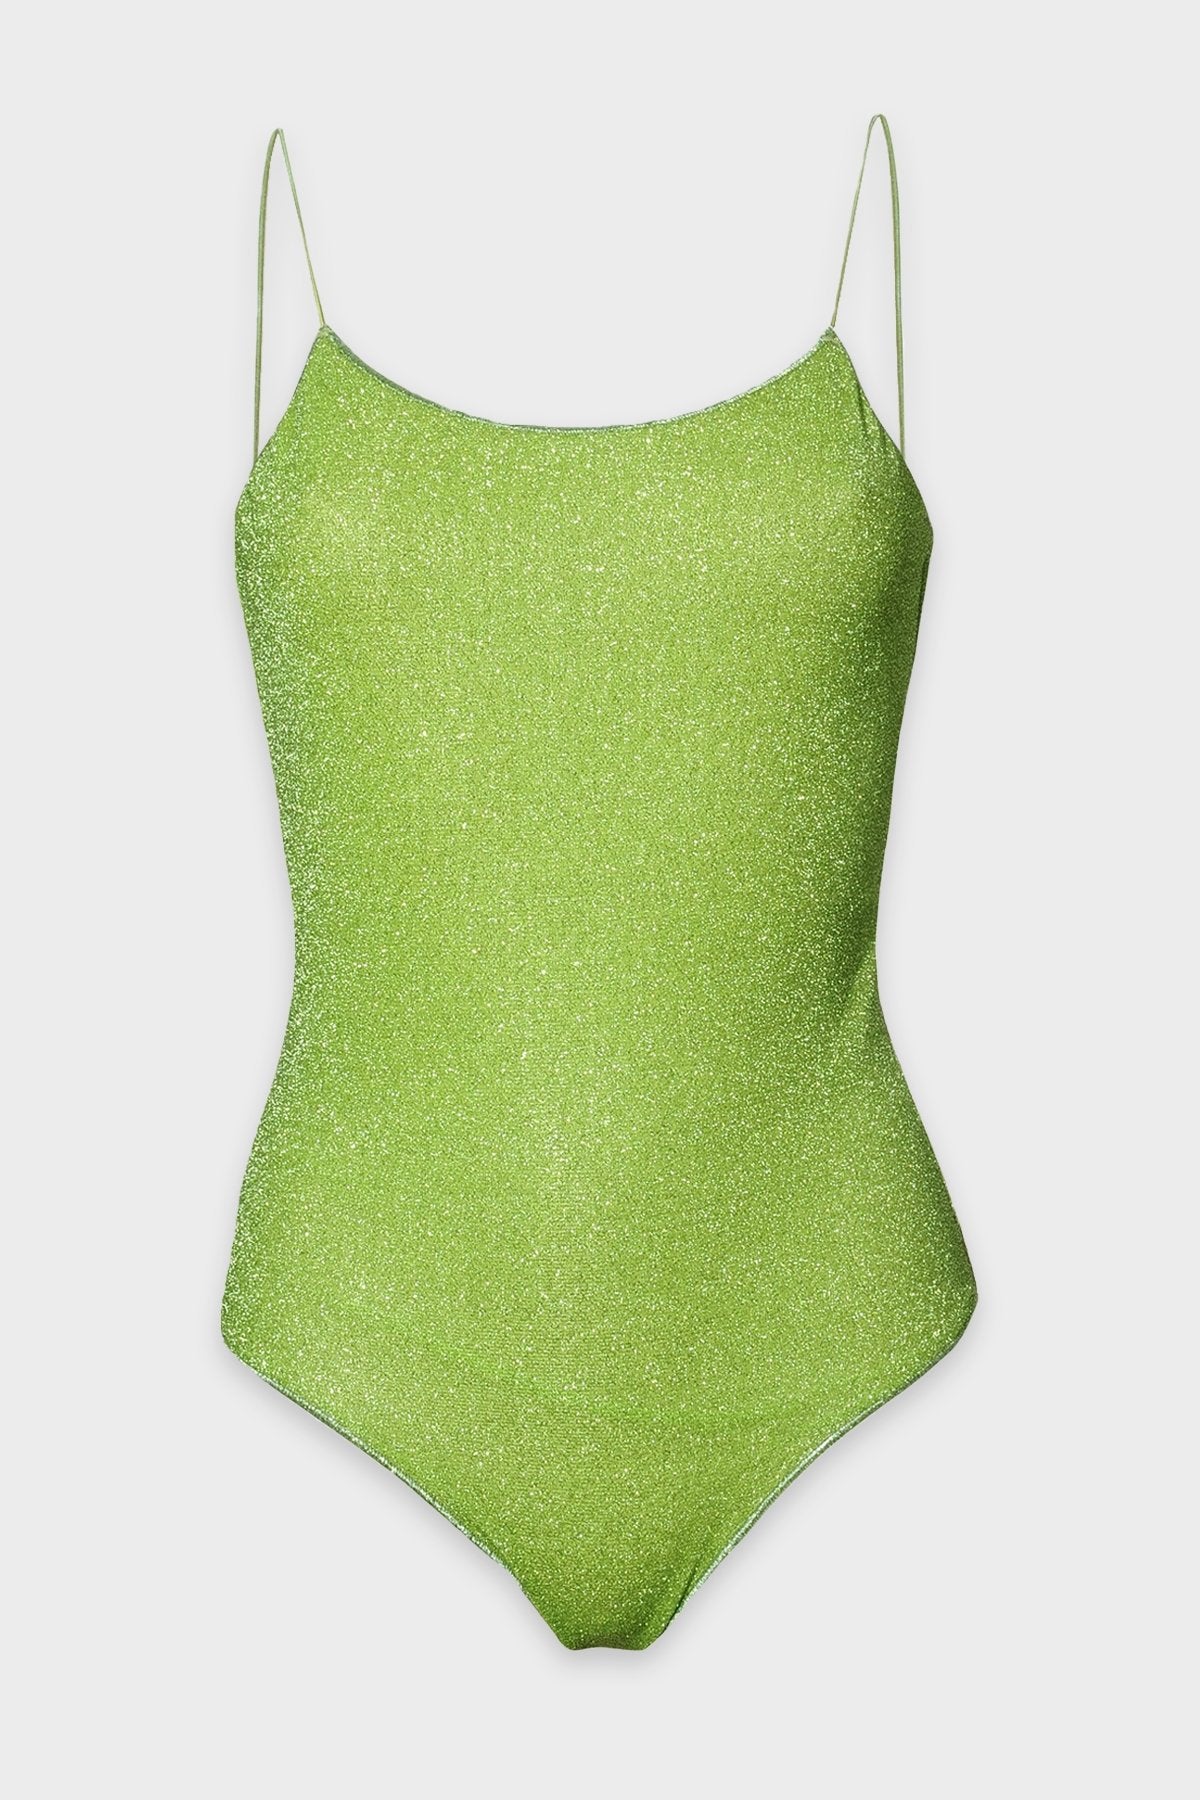 Lumière Maillot in Lime - shop-olivia.com